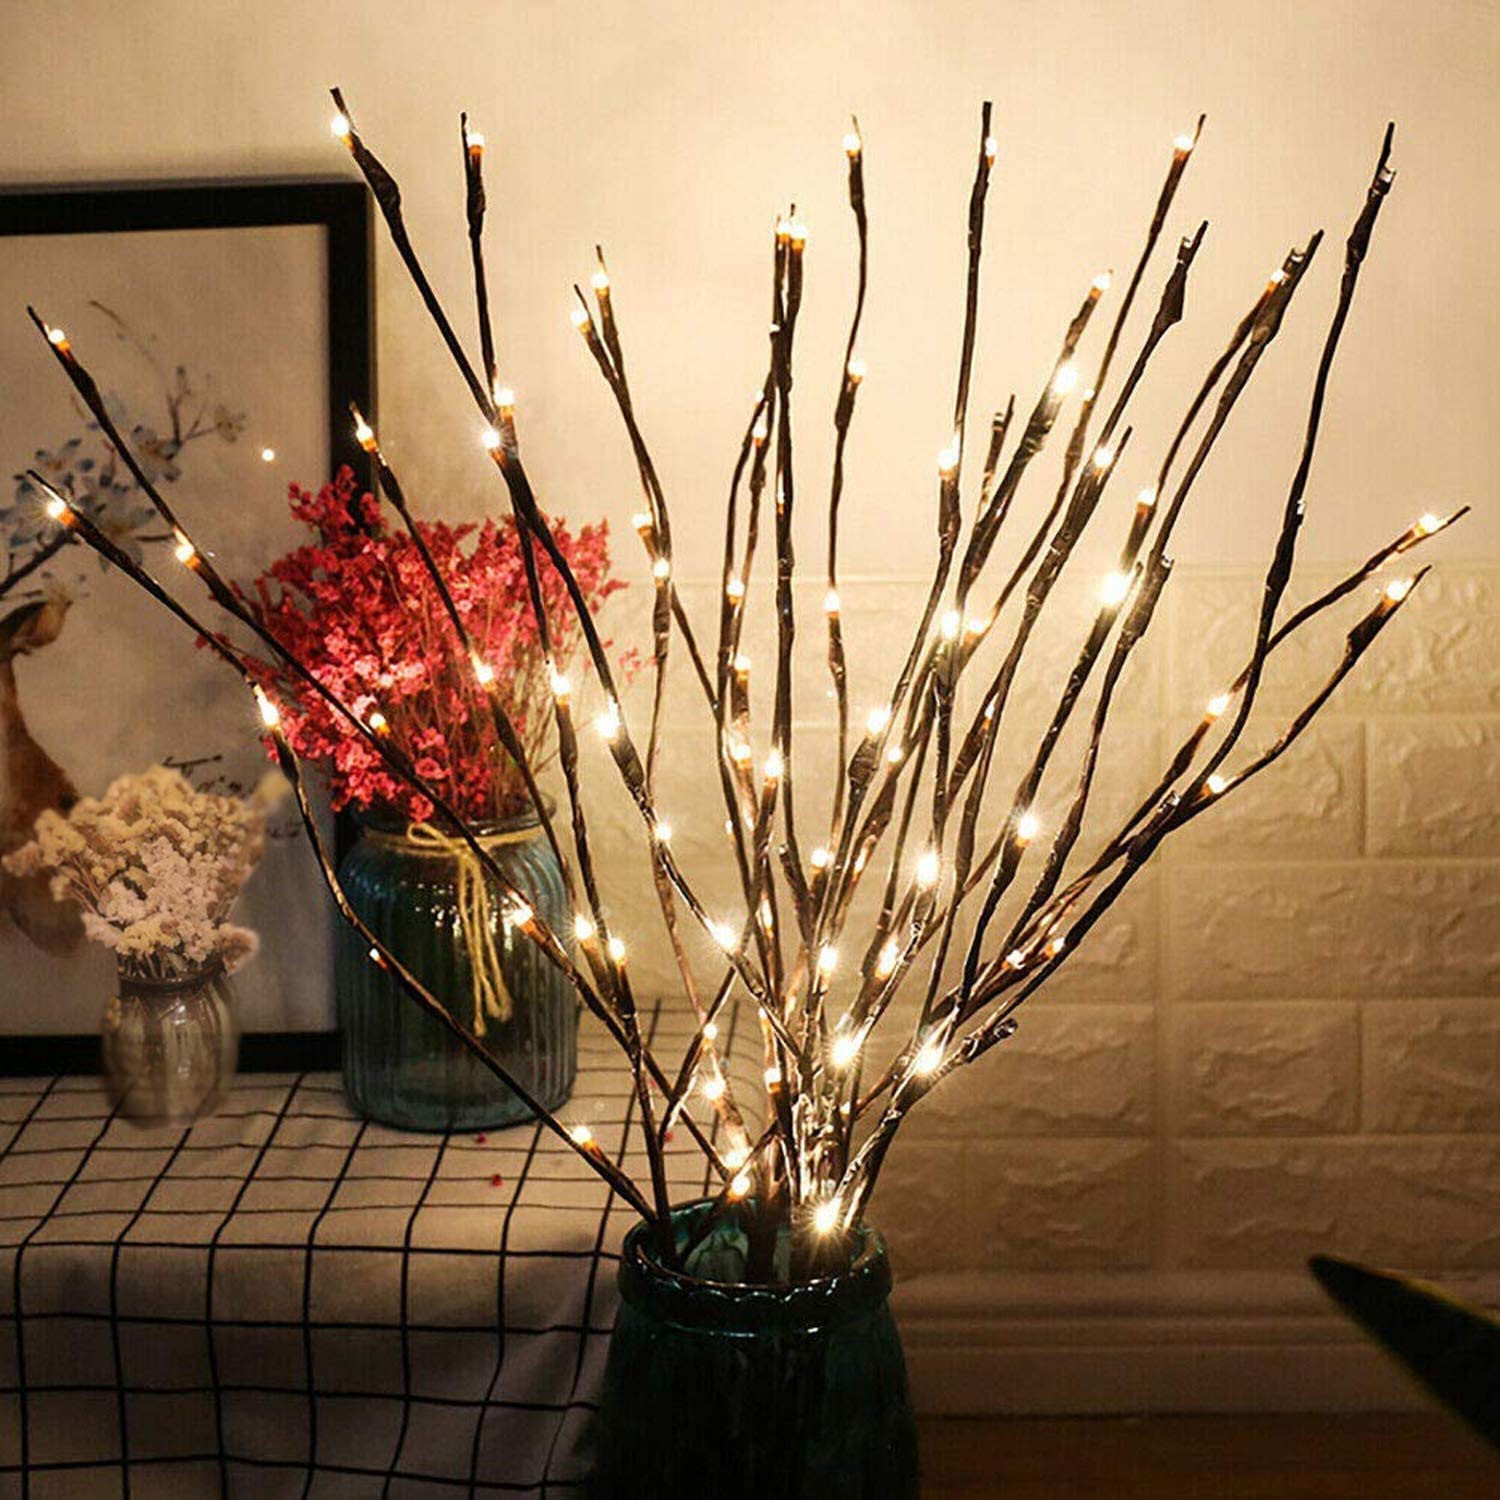 G-MORE Decorative Twig Lights LED Branch Lights Flexible Branch Decoration Light Battery Operated for Birthday Wedding Fairy Lights Bedroom,Warm White 30 Inches (2 Pack)